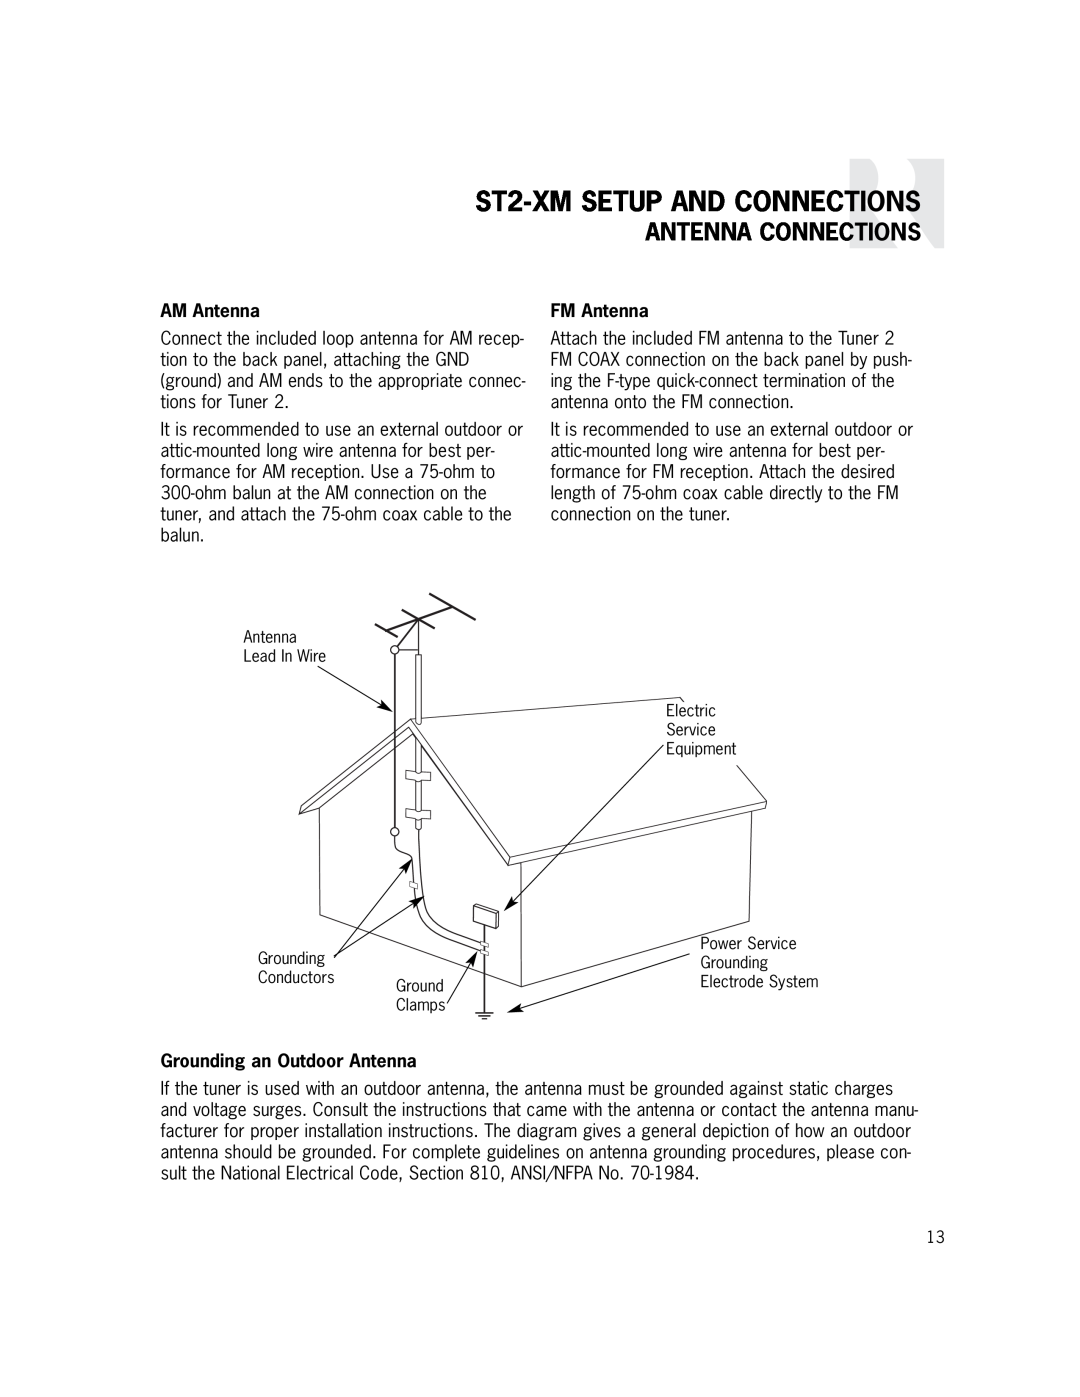 Russound ST2-XMSETUP AND CONNECTIONS, Antenna Connections, AM Antenna, FM Antenna, Grounding an Outdoor Antenna, Clamps 